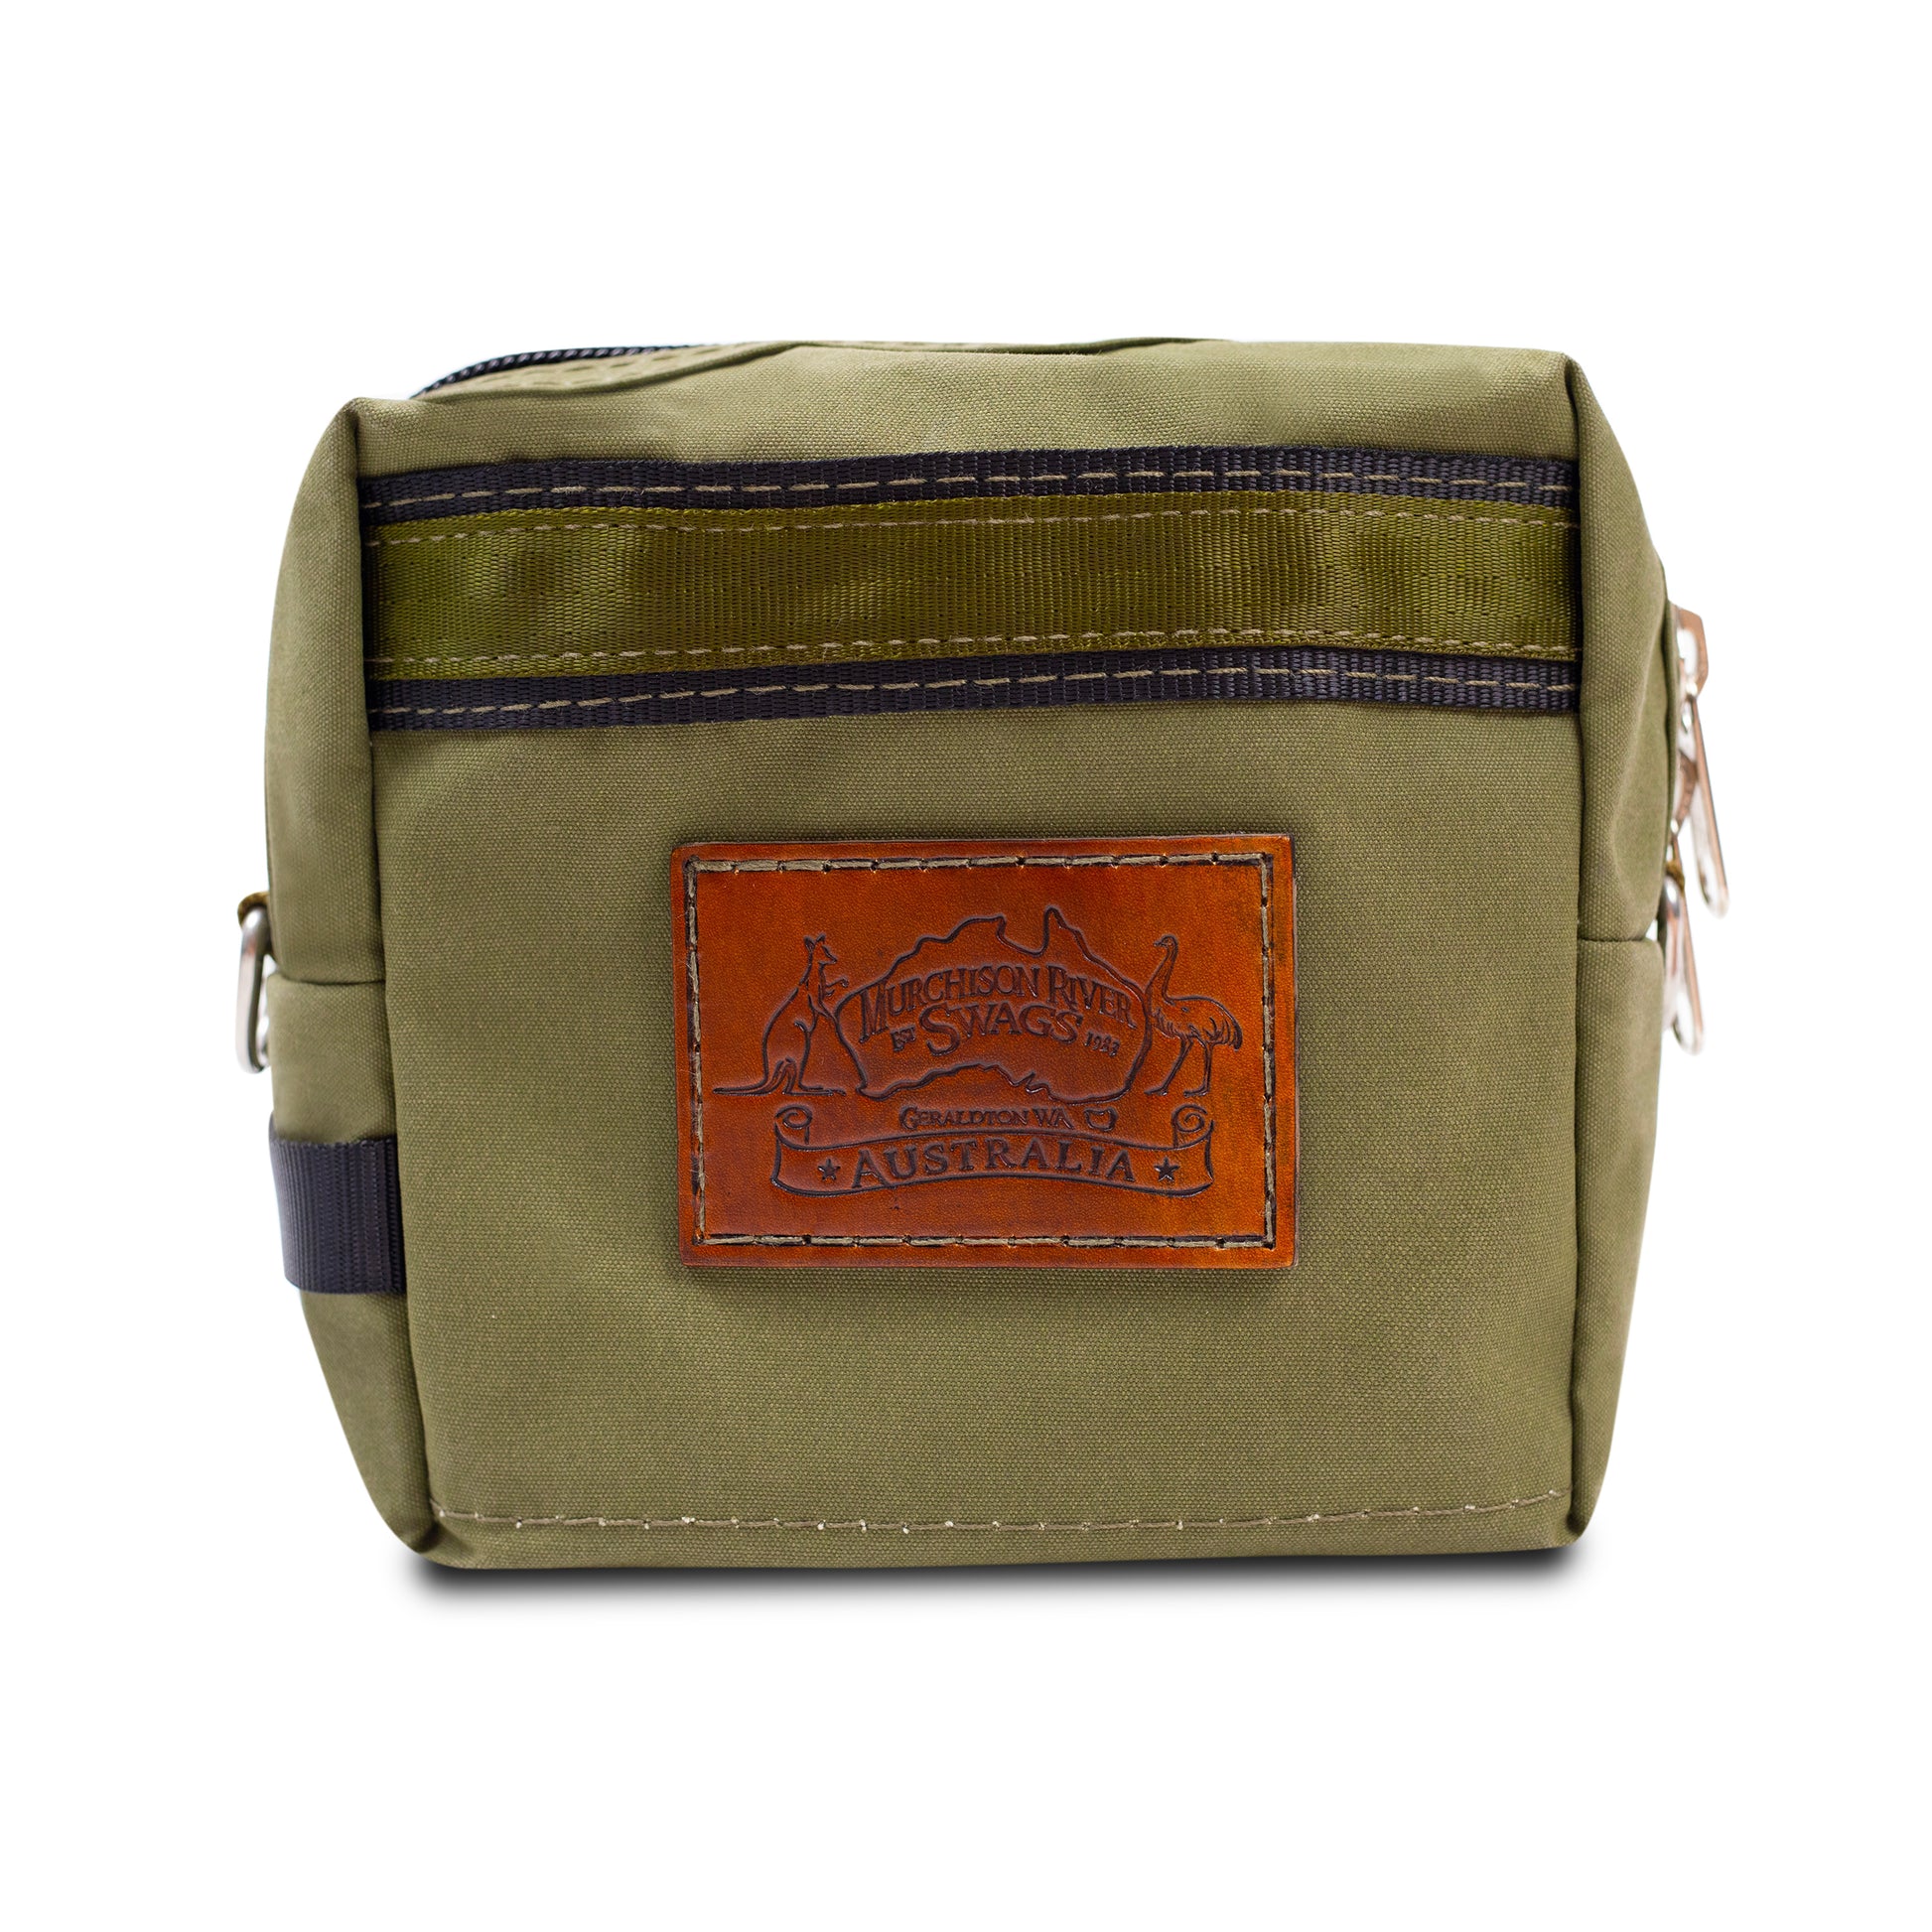 Small Army Green Canvas Kit Bag.